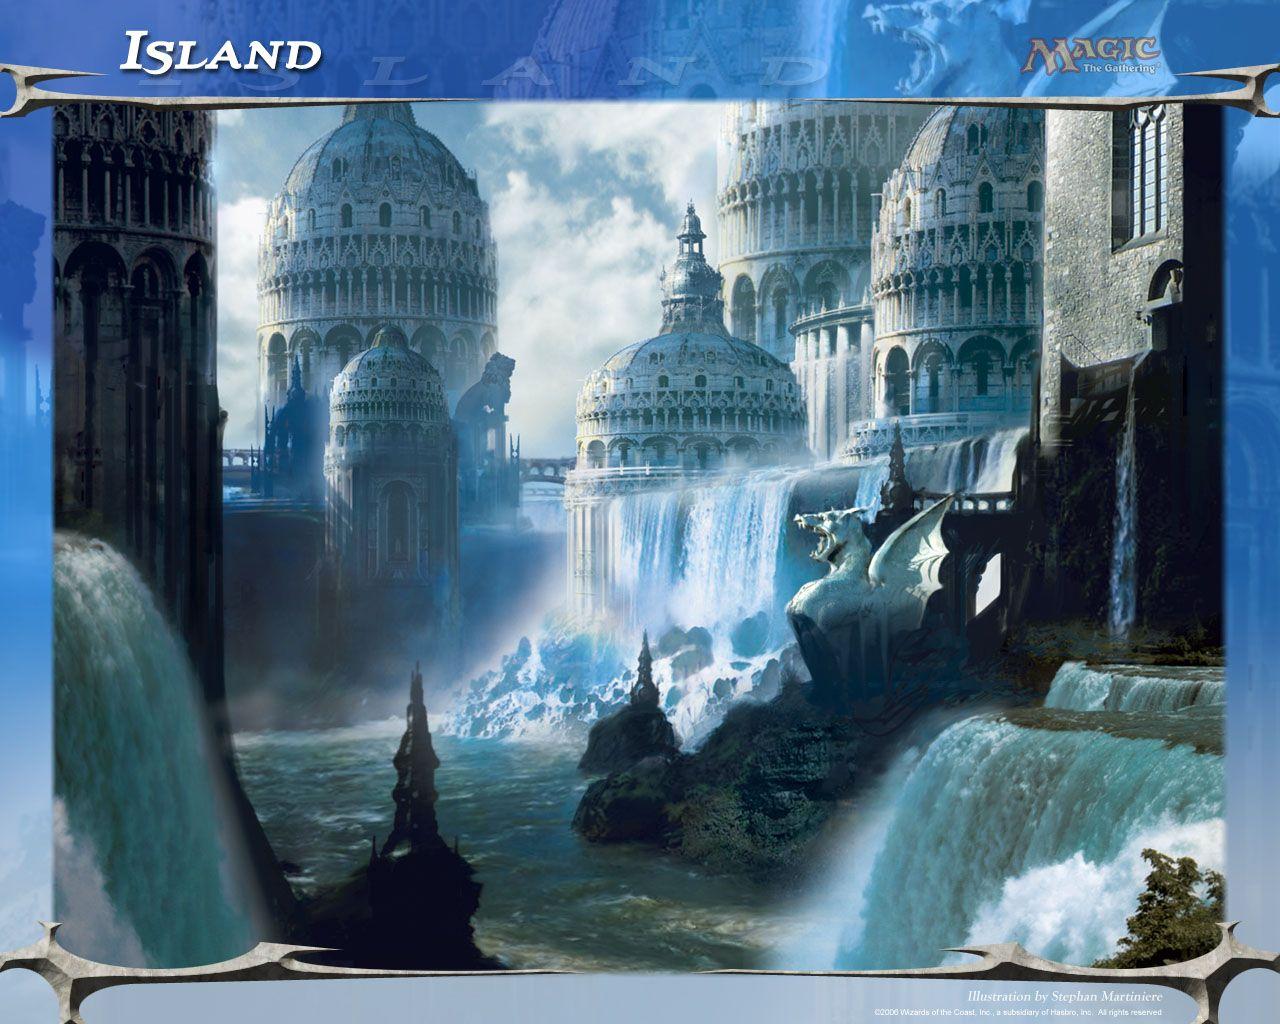 Wallpaper of the Week: Island, Daily MTG, Magic: The Gathering